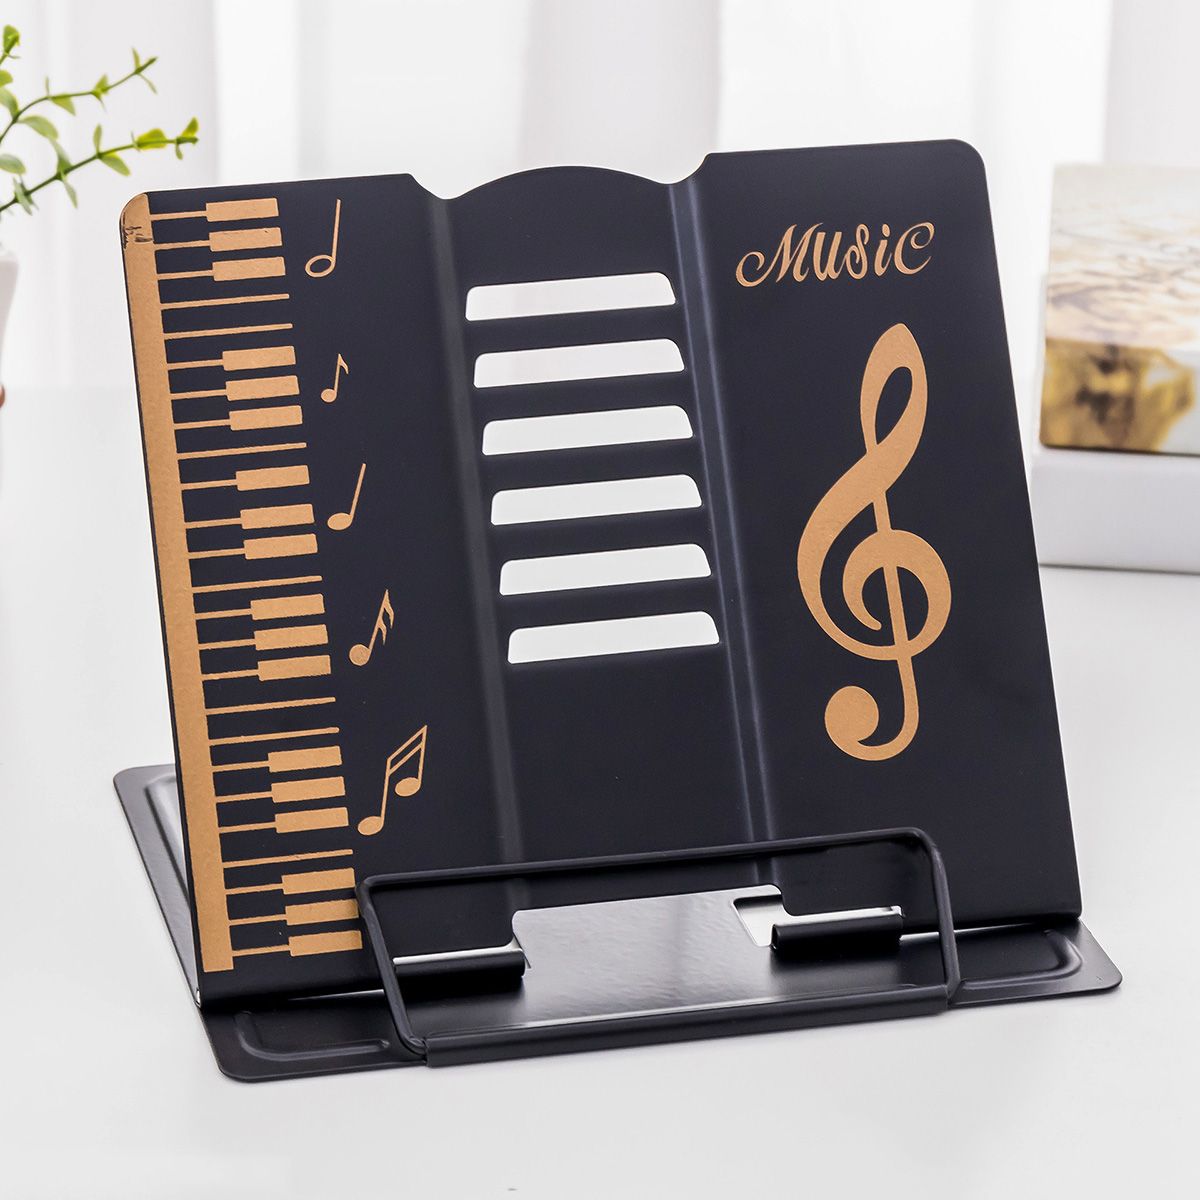 Metal-Adjustable-Music-Book-Pad-Holder-Stand-Music-Practice-Portable-Rack-Bookends-1564293